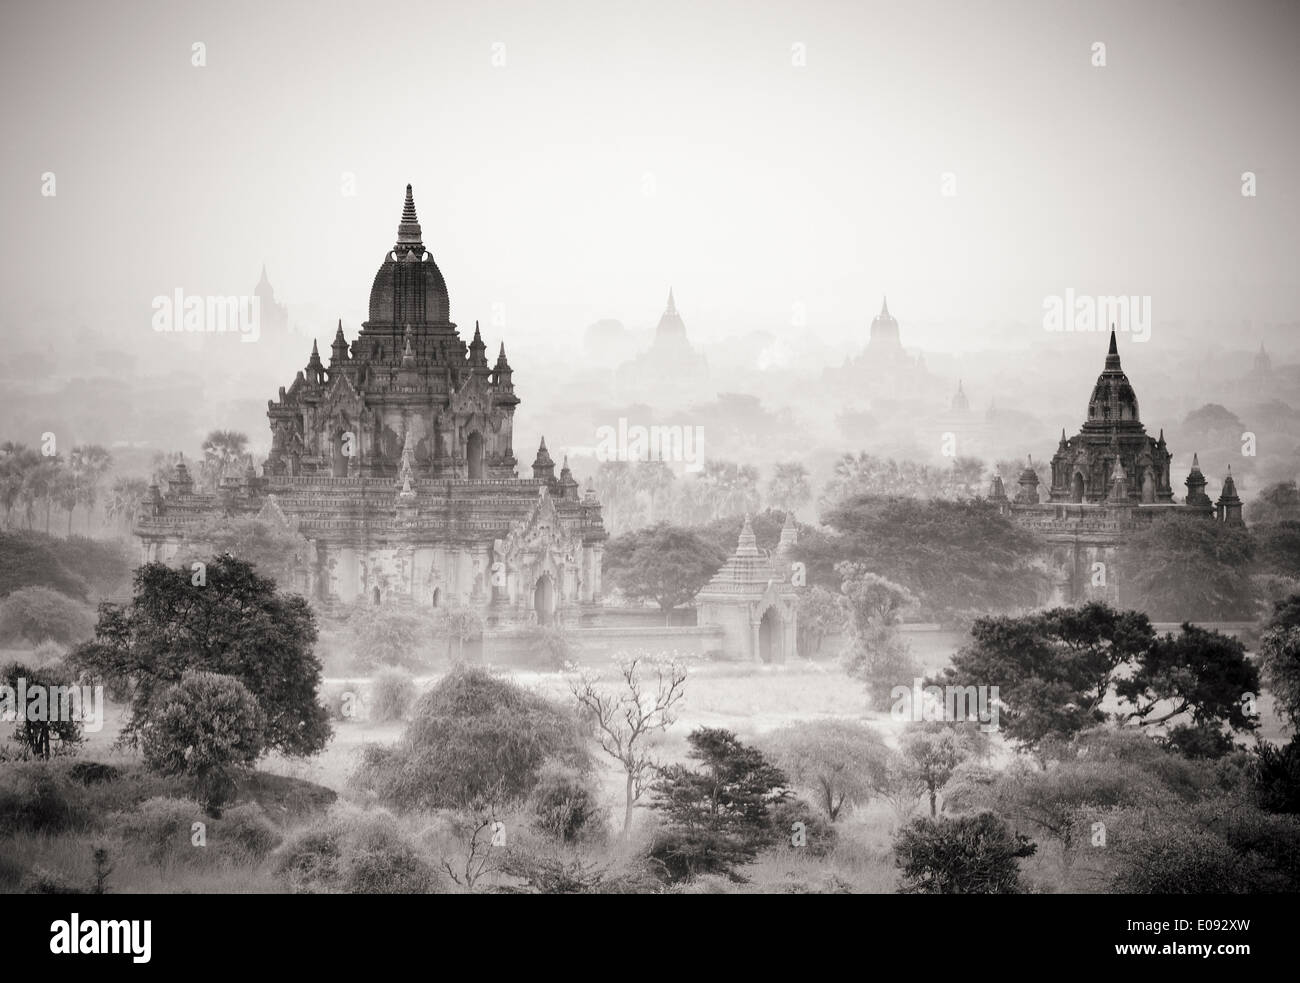 South East Asia Myanmar Burma Bagan Pagan temples stupas at dawn sunrise in the archaeolgical site Stock Photo